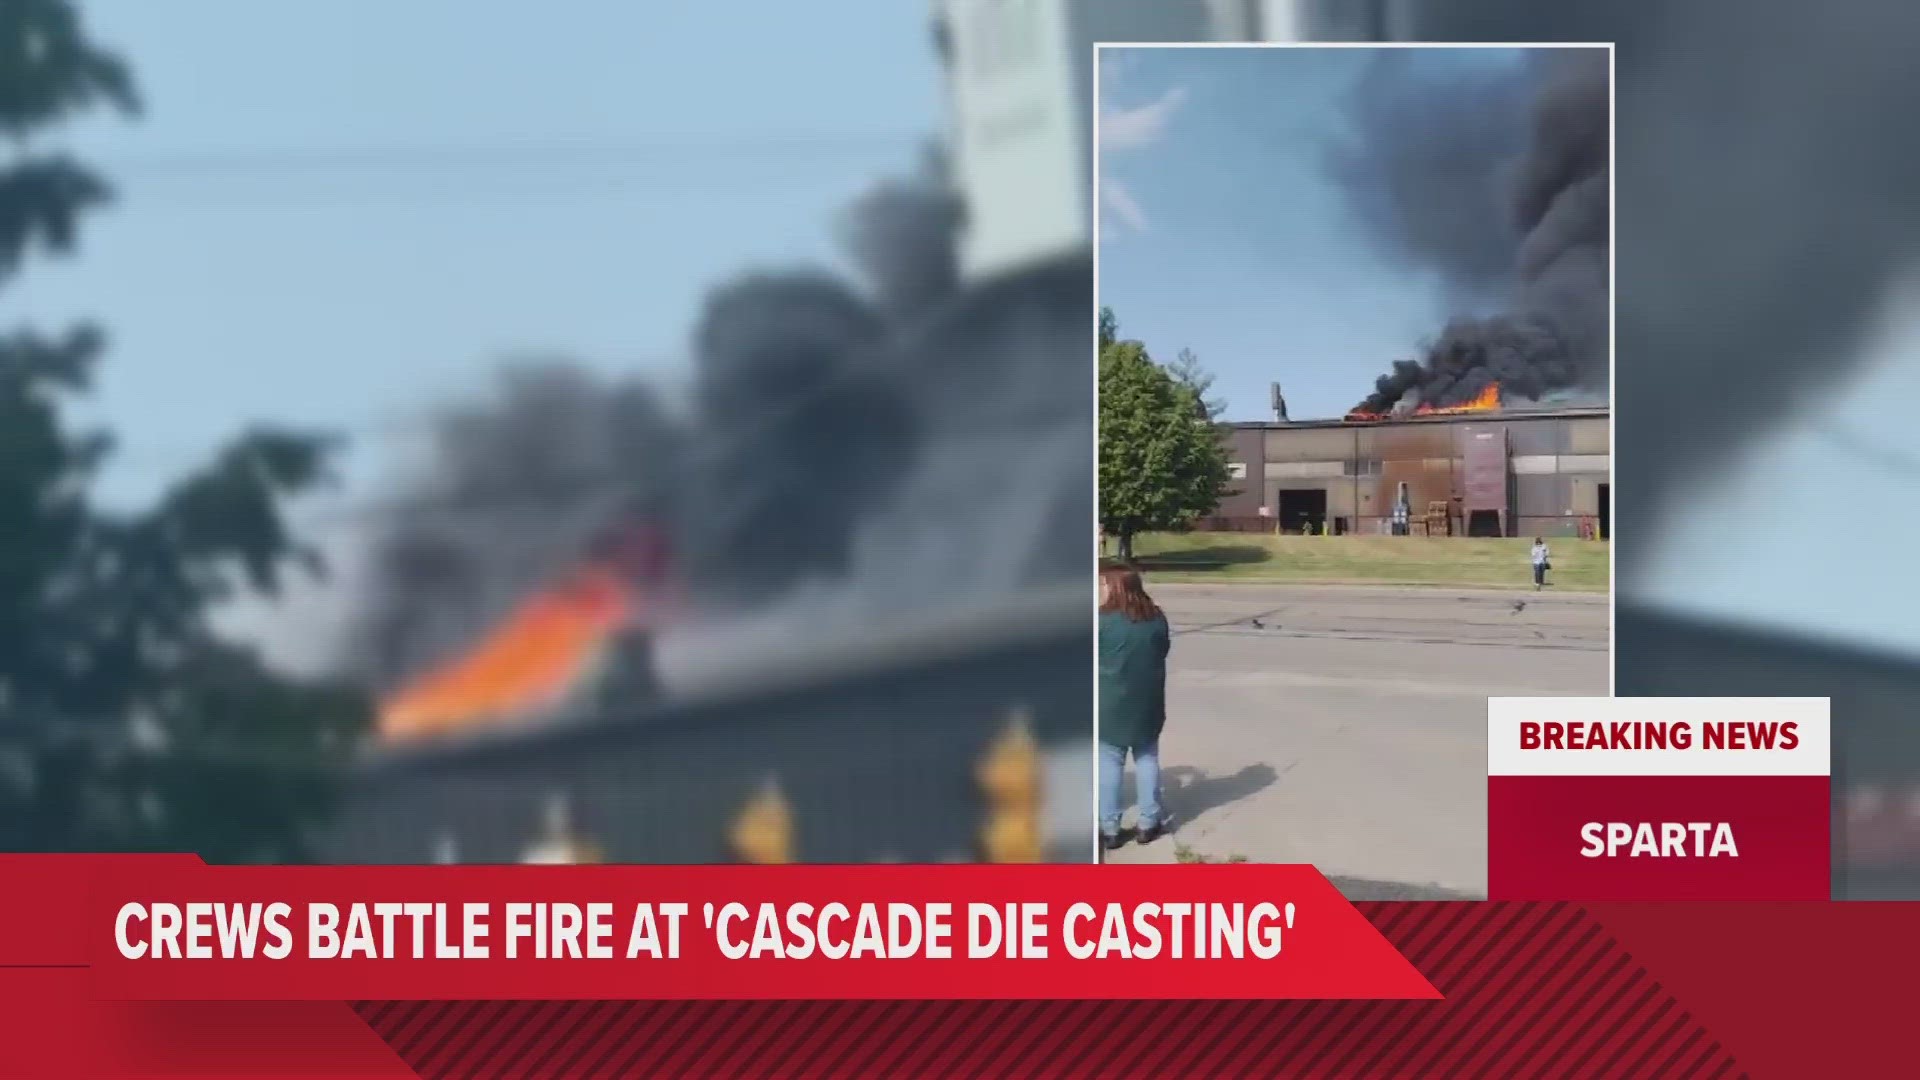 Cascade Die Casting is in the 9900 block of Sparta Avenue NW. Flames and smoke could be seen coming from the roof of the building.